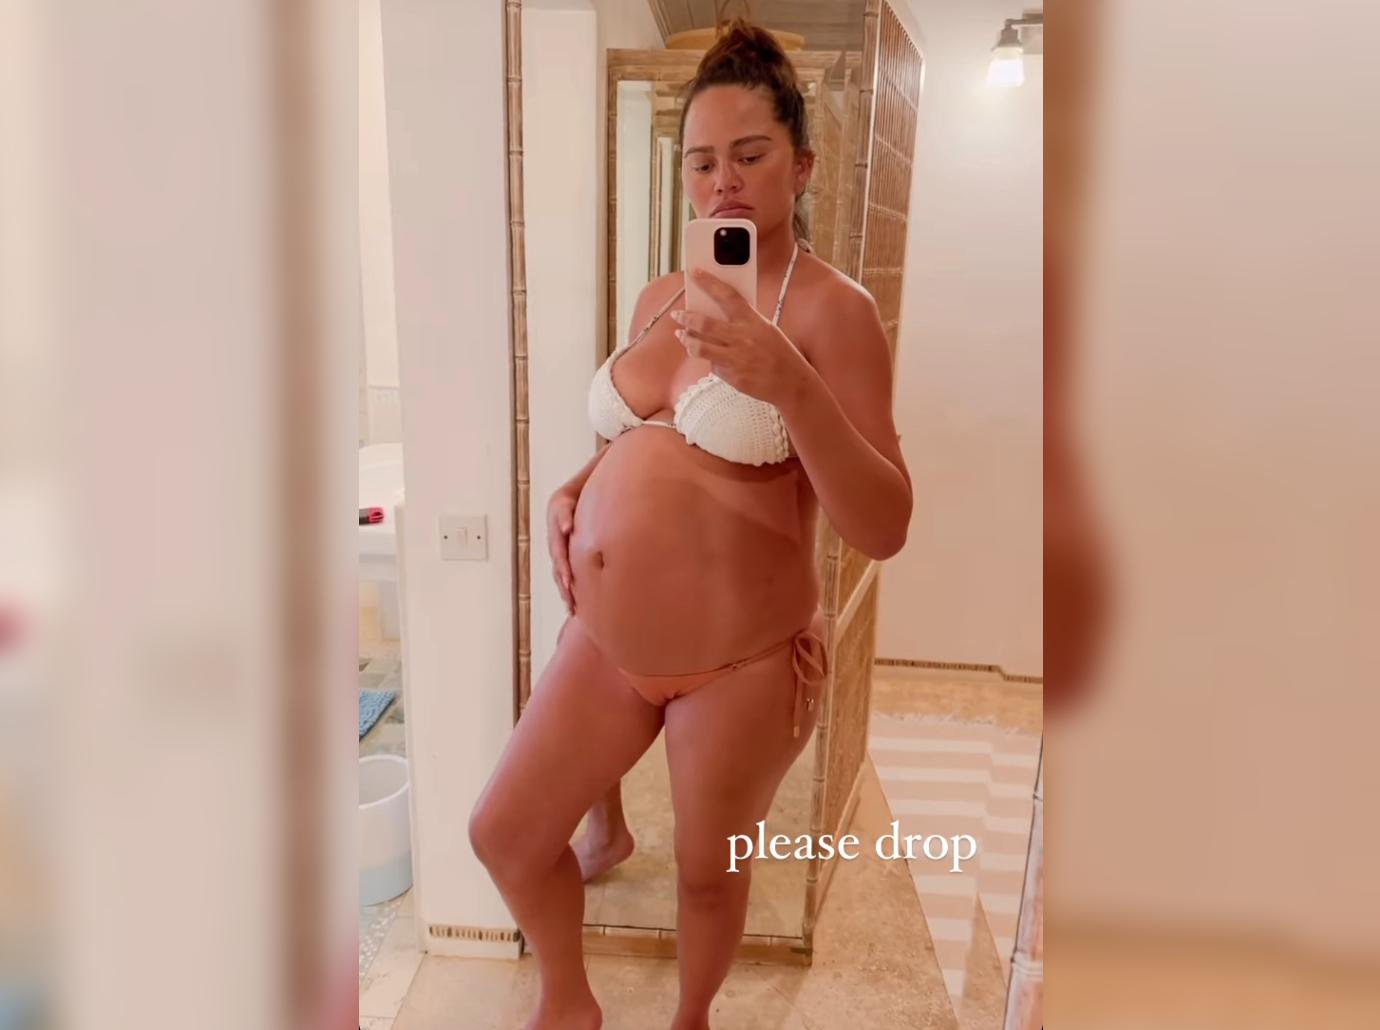 Pregnant Chrissy Teigen reveals her boobs are now a size 40DD